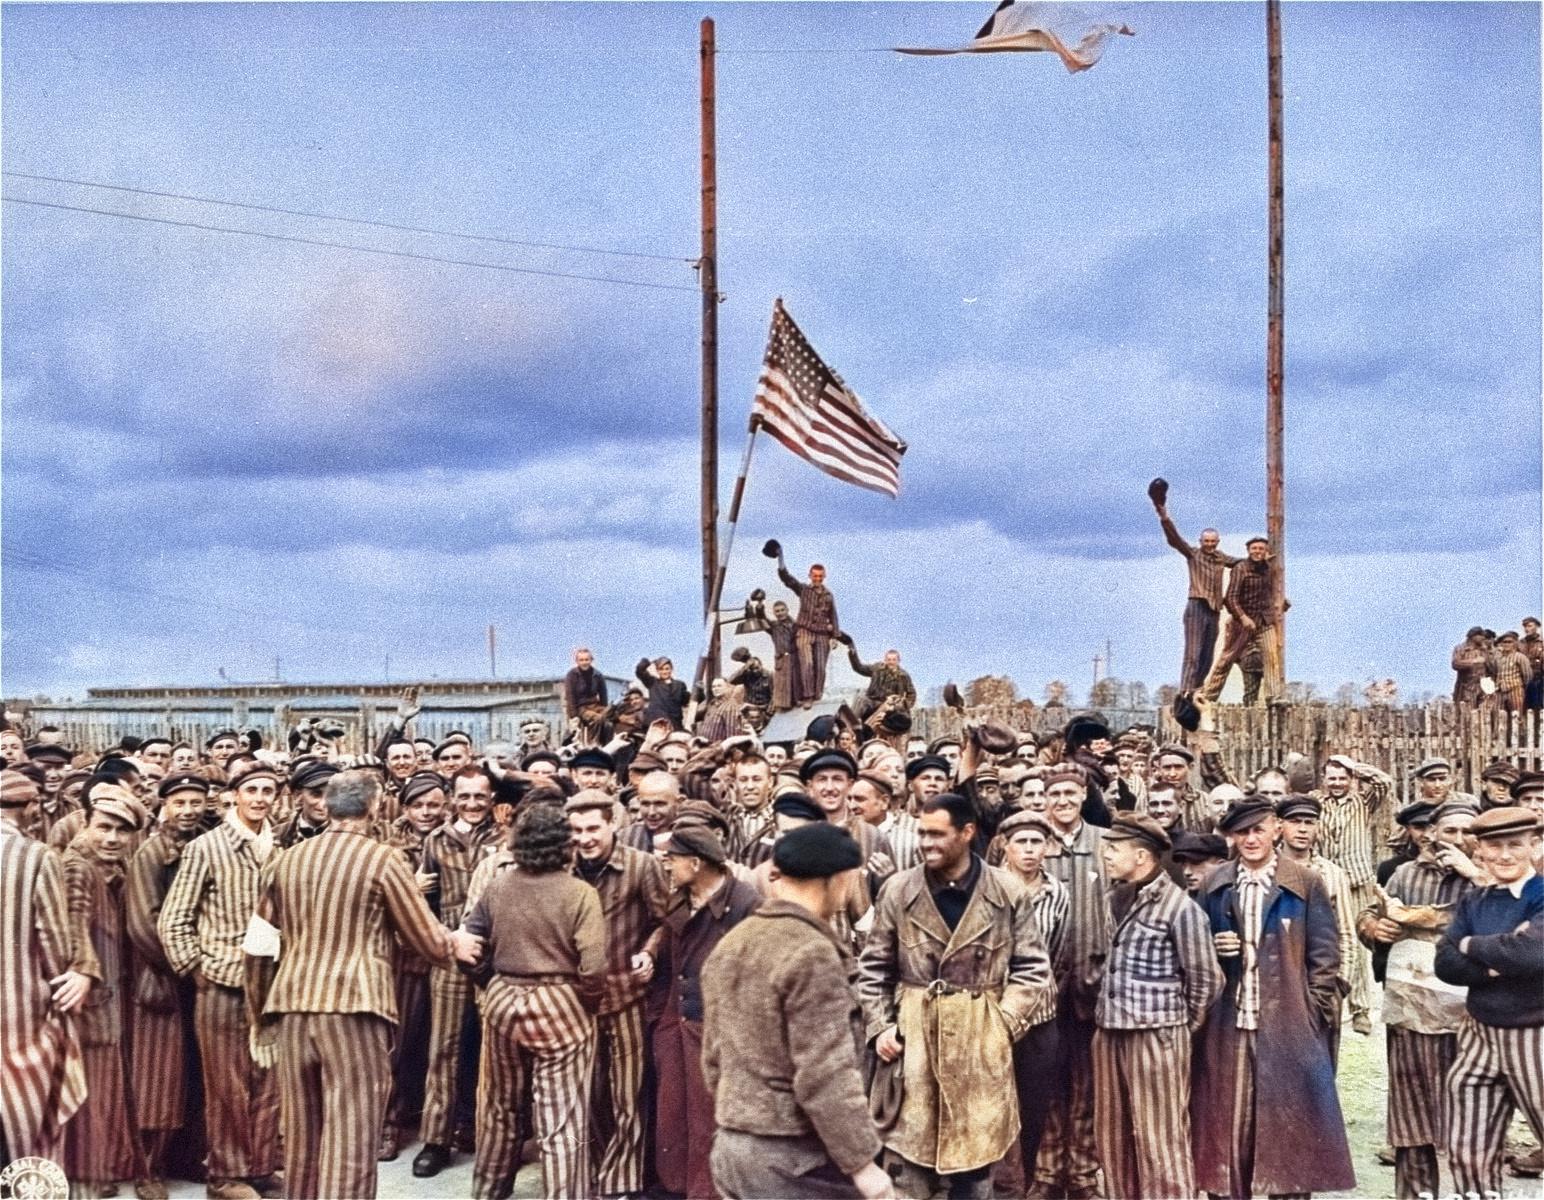 Color version of the liberation photo.